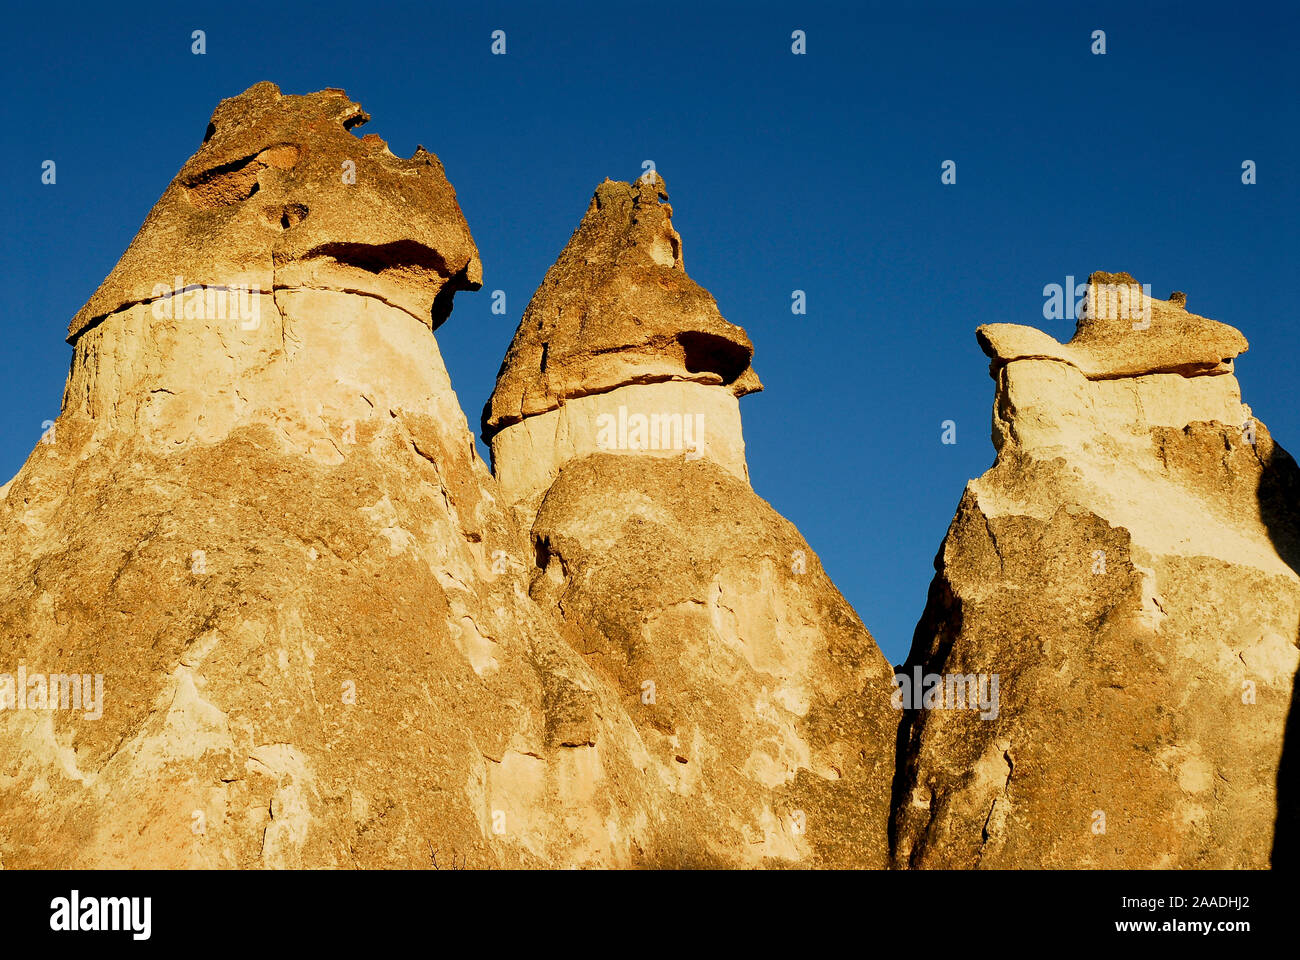 Pinnacles, also known as fairy chimneys or hoodoo,  Love Valley. Goreme National Park and the Rock Sites of Cappadocia UNESCO World Heritage Site. Turkey. December 2006. Stock Photo